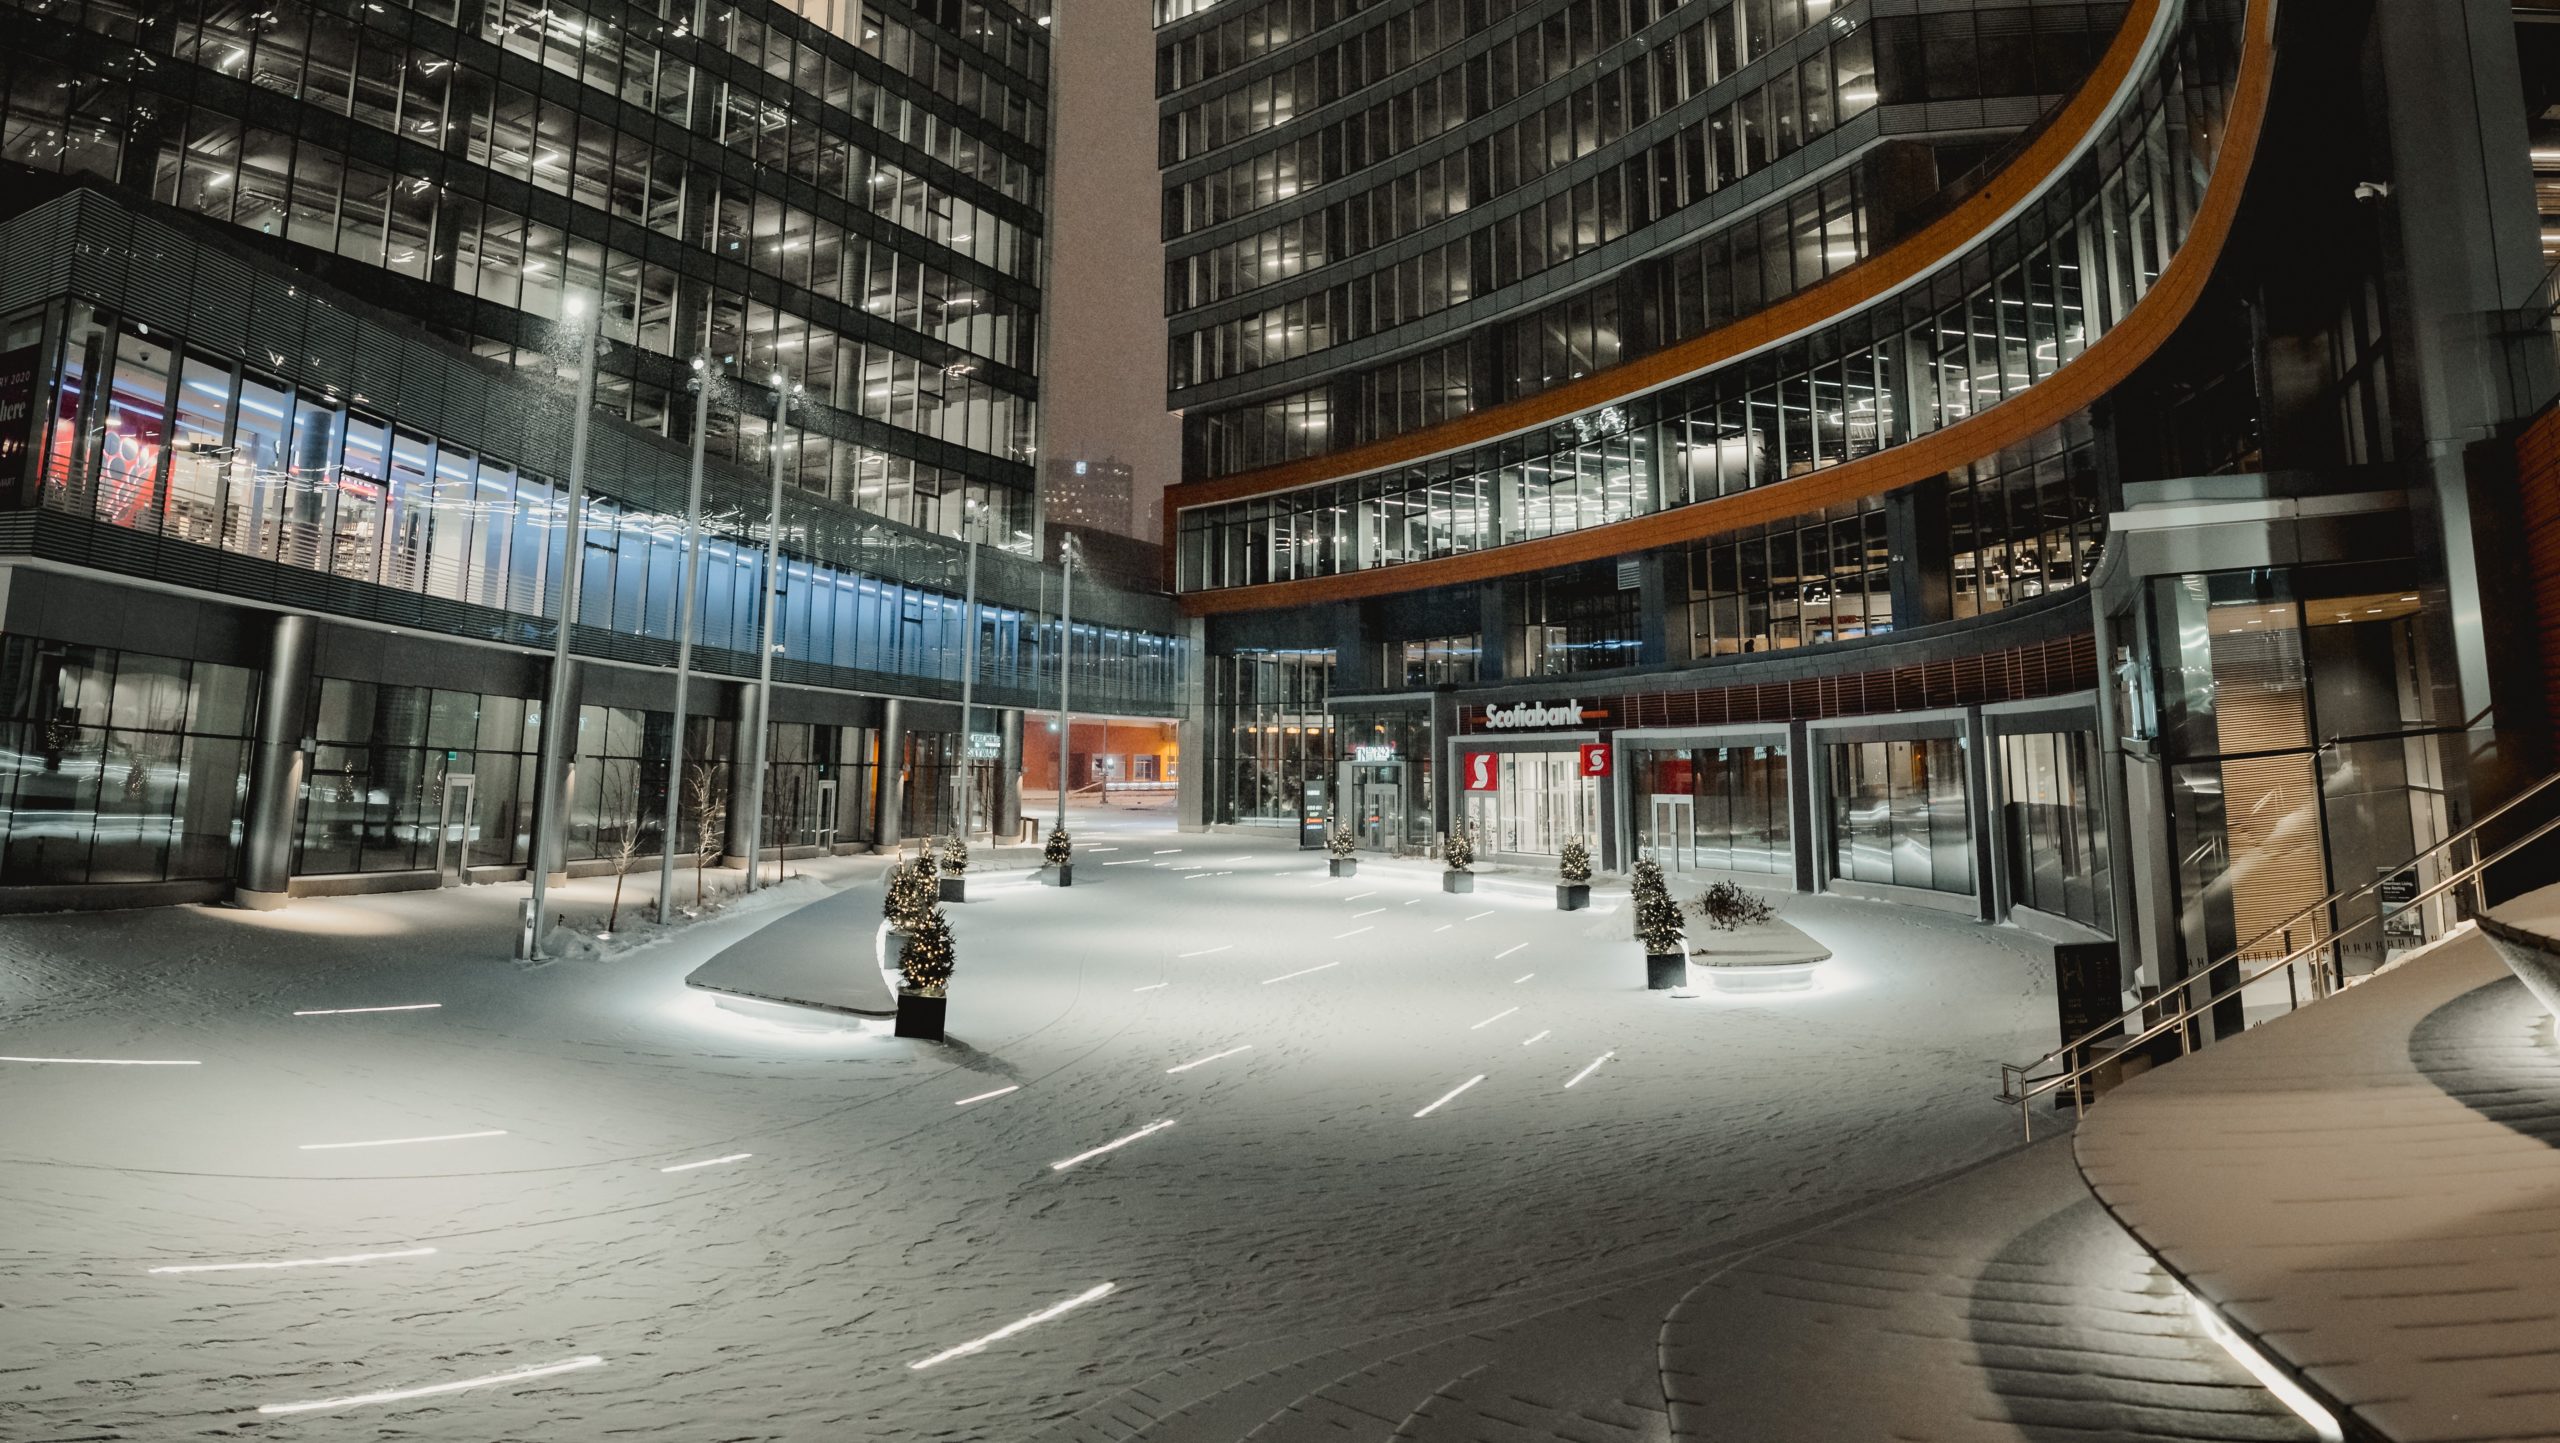 True North Square and the Downtown Winnipeg BIZ Light Up! Downtown this November